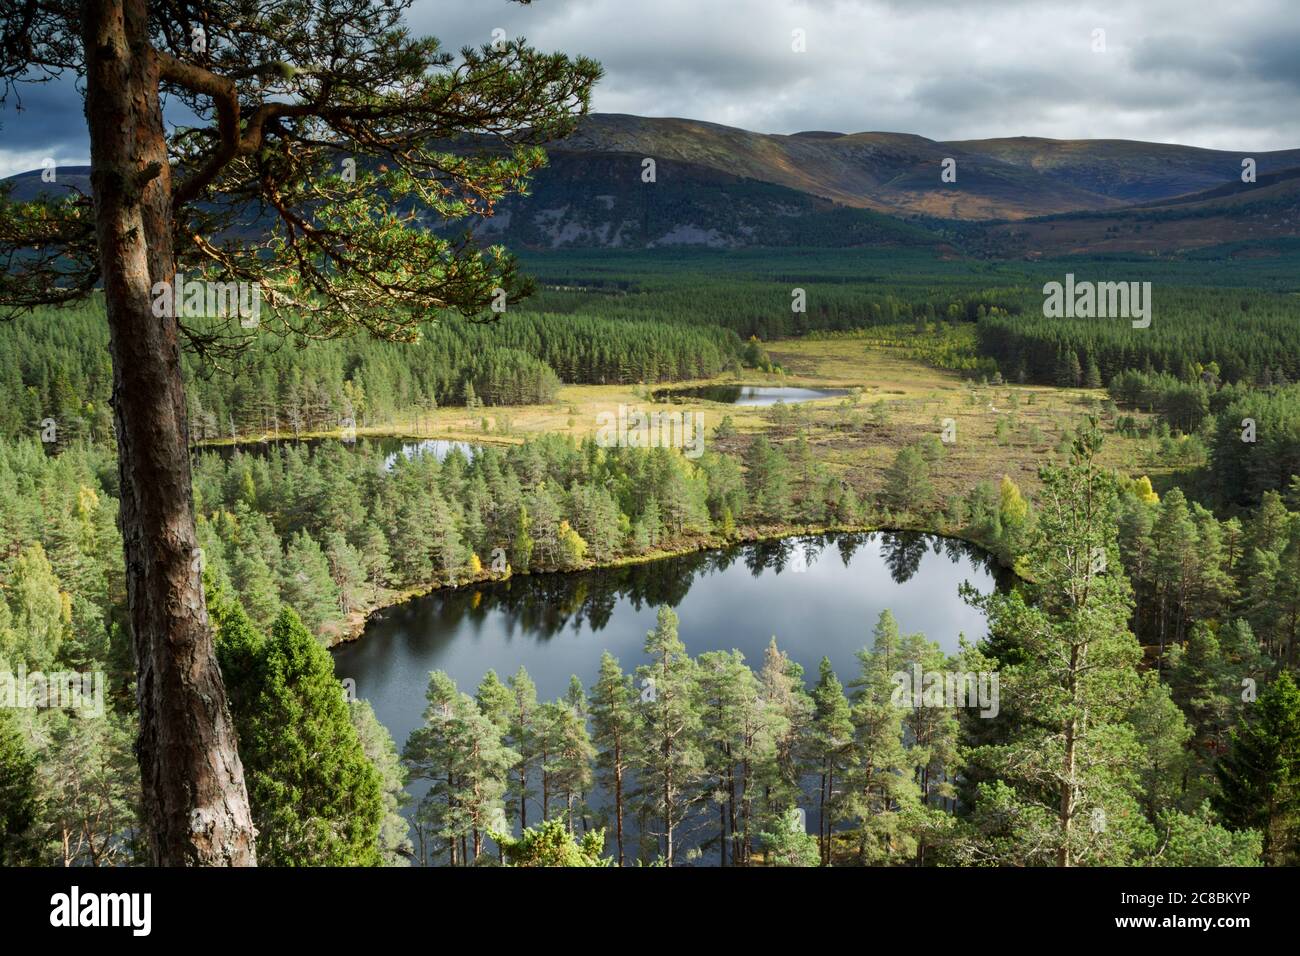 Elivated view over Uath Lochan looking towards the Cairngorms massif in the Scottish Highlands Stock Photo